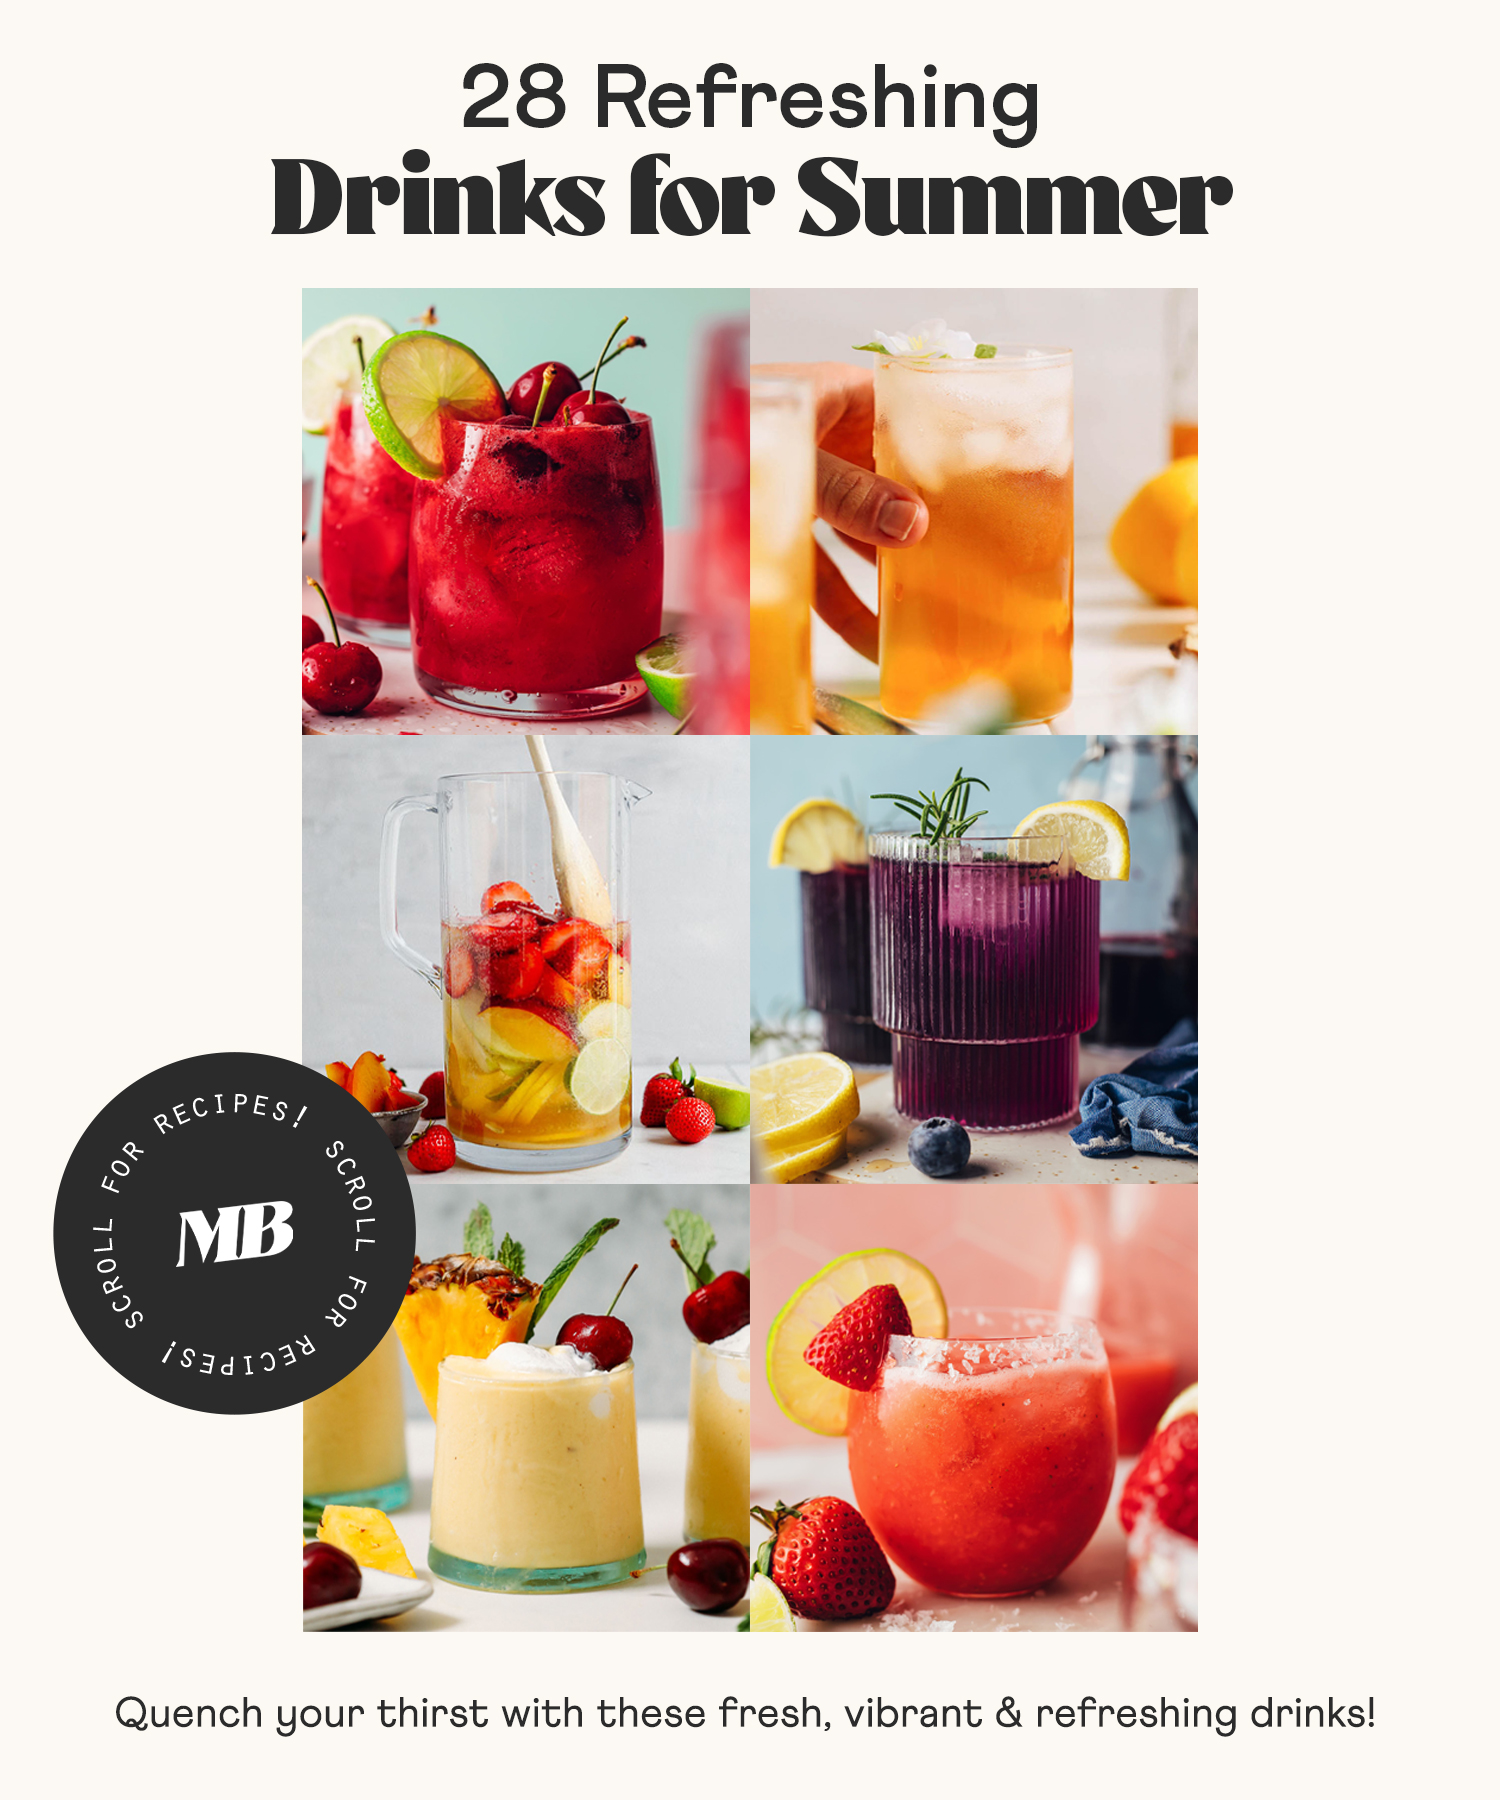 Cherry limeade, iced tea, mocktails, smoothies, and cocktails for our round-up of refreshing drinks for summer